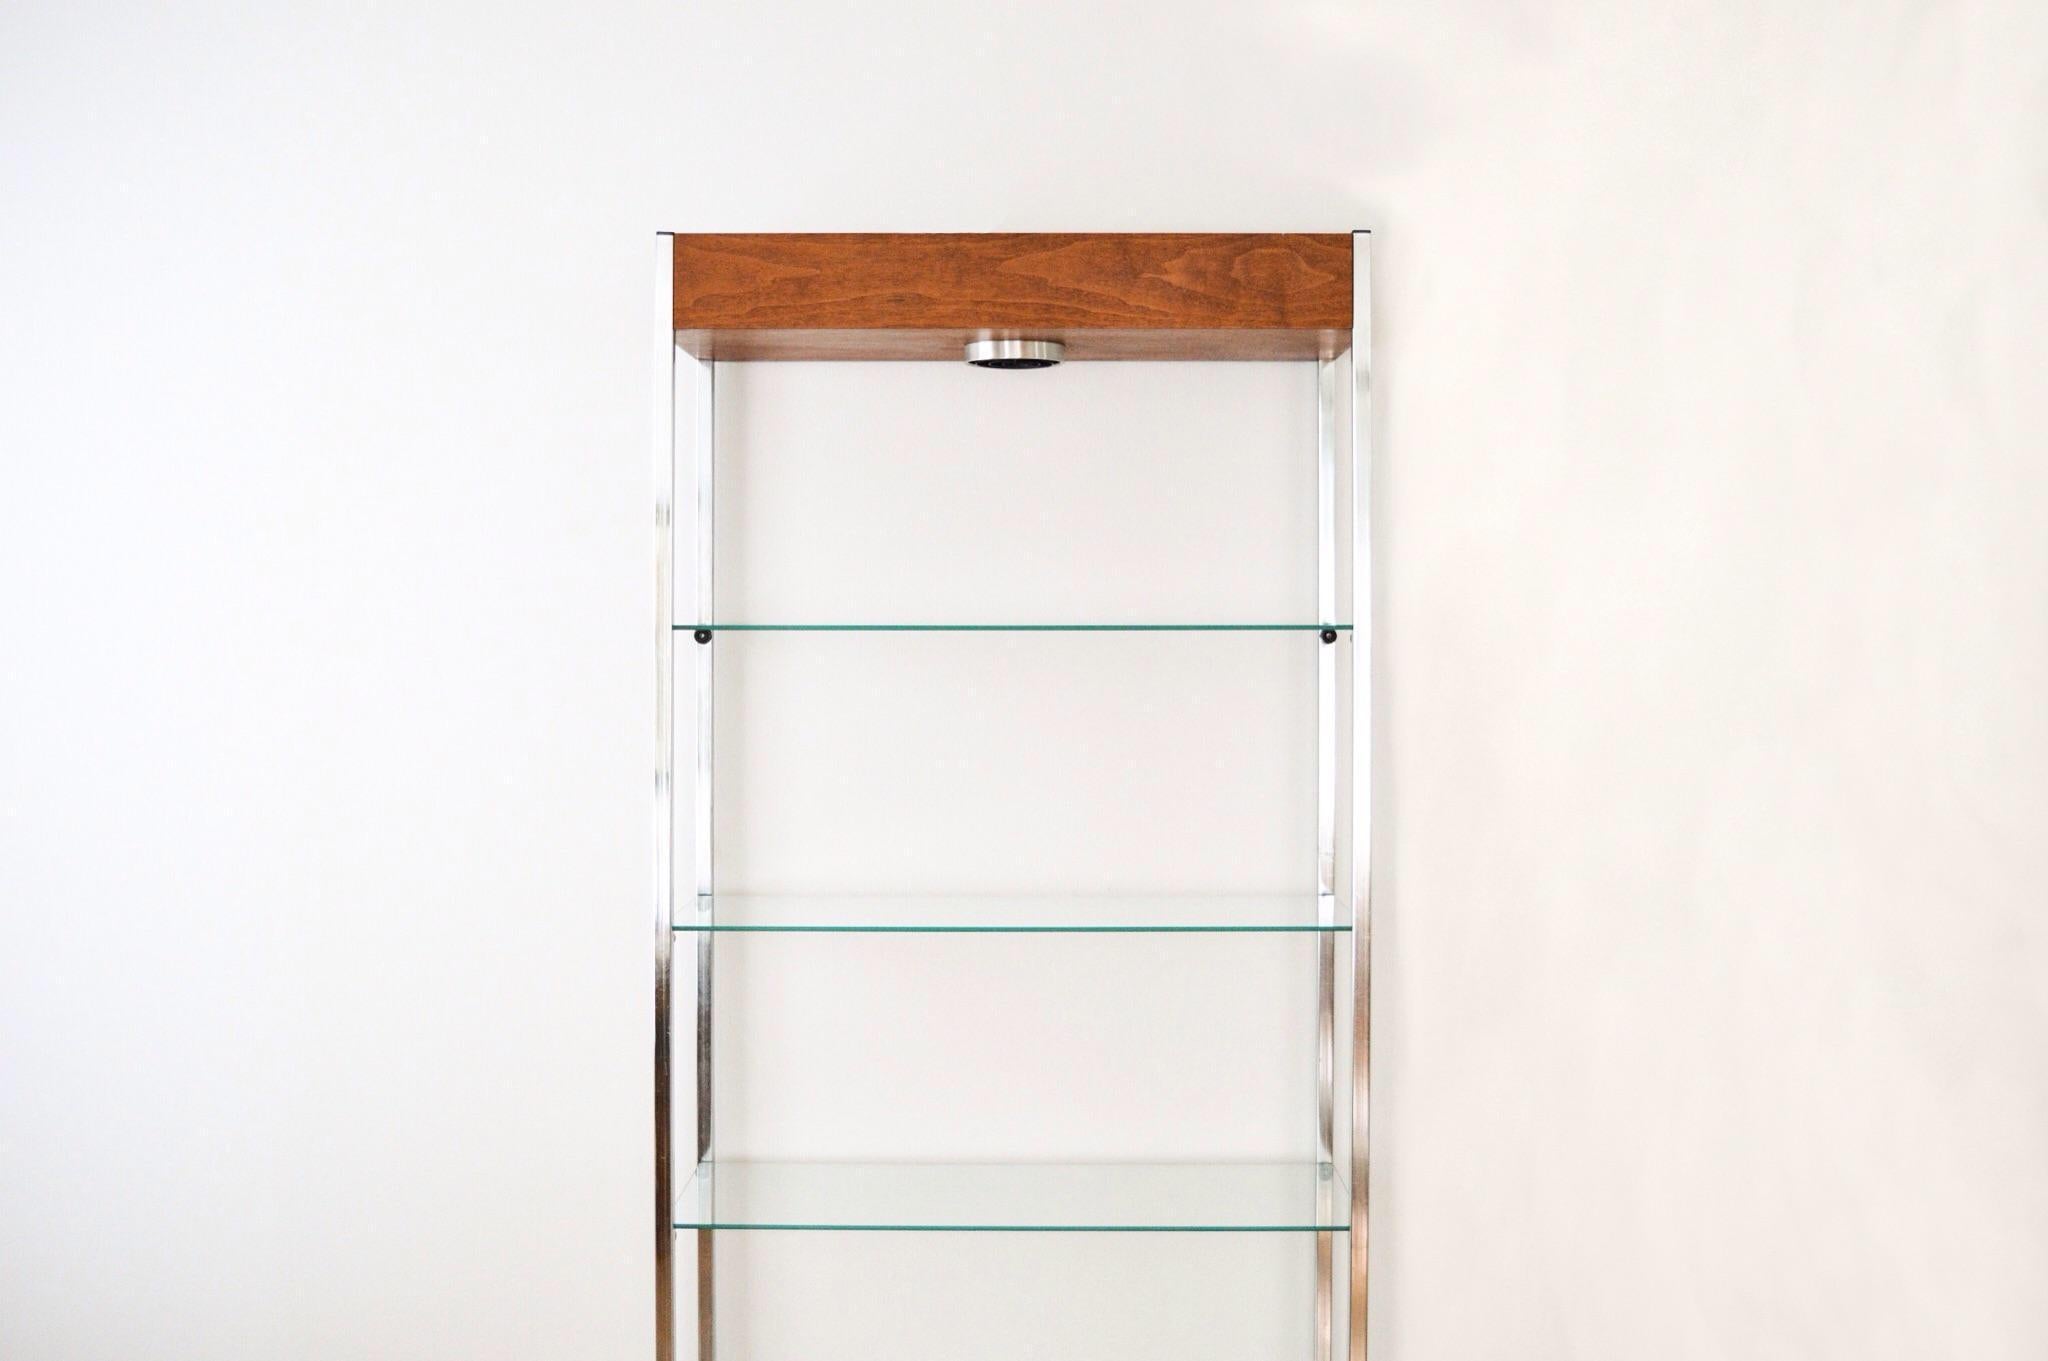 American Midcentury Wood and Glass Etagere Display Shelf, 1960s